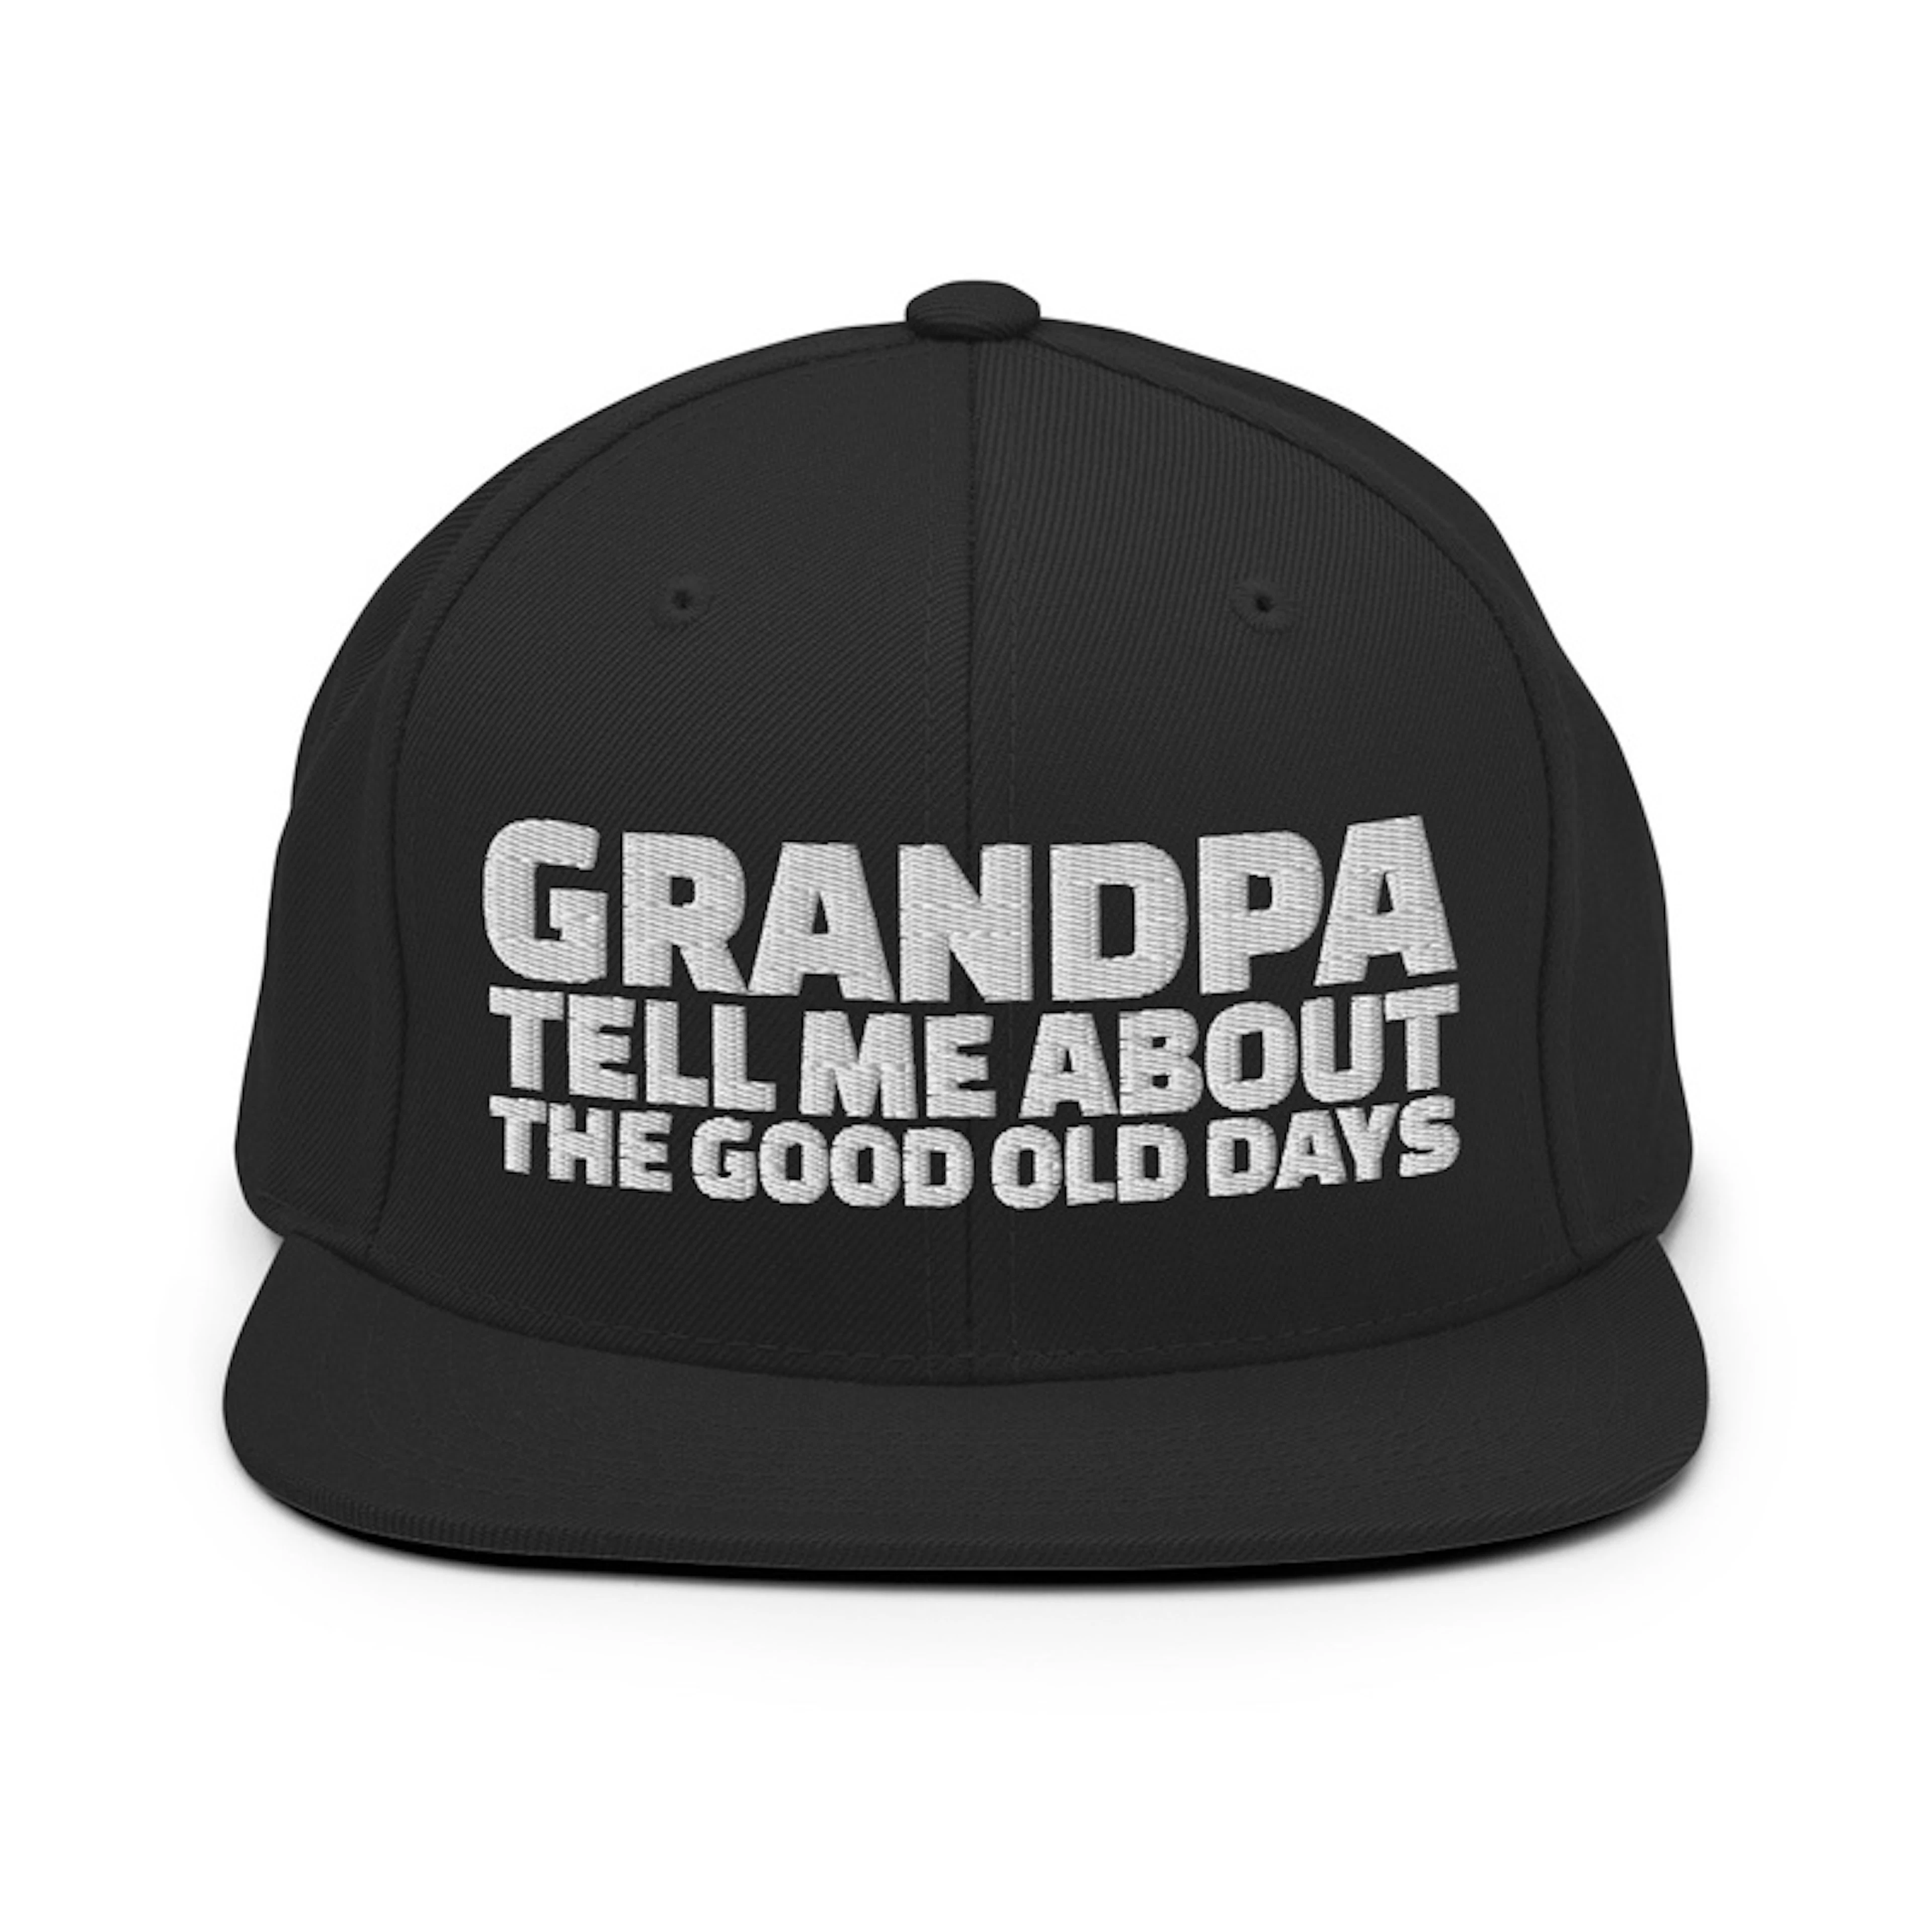 Grandpa tell me about the good old days 